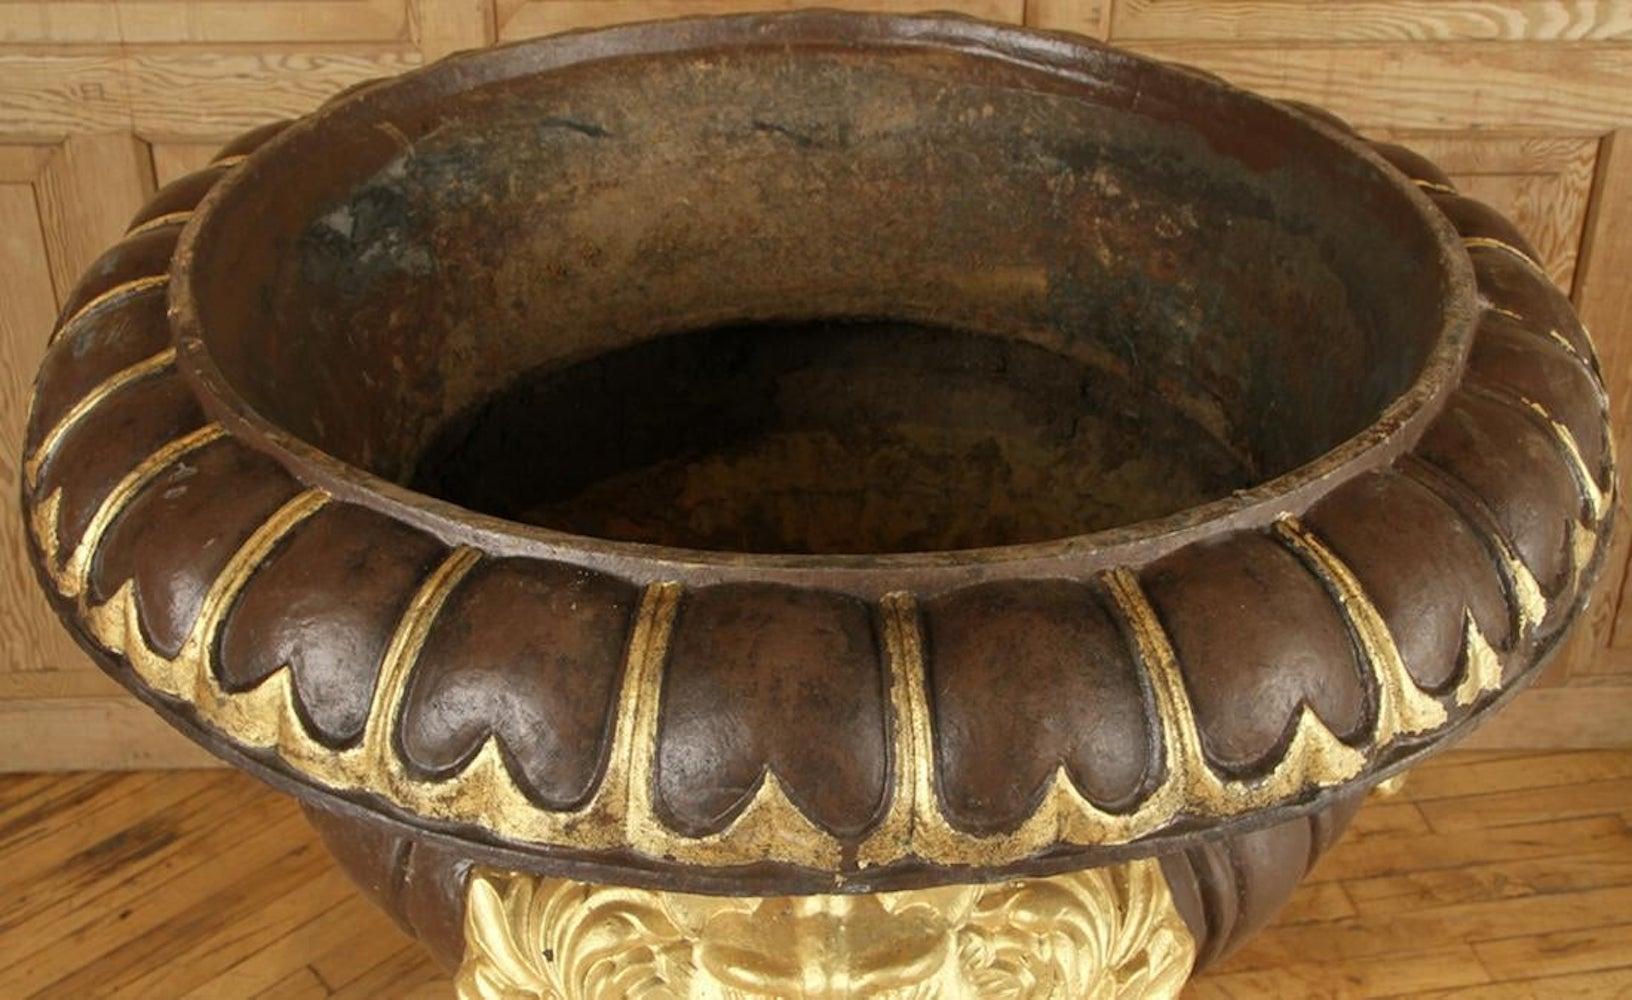 A monumental cast iron garden urn having gold-painted lion masks in relief. Measures: Height 41.5